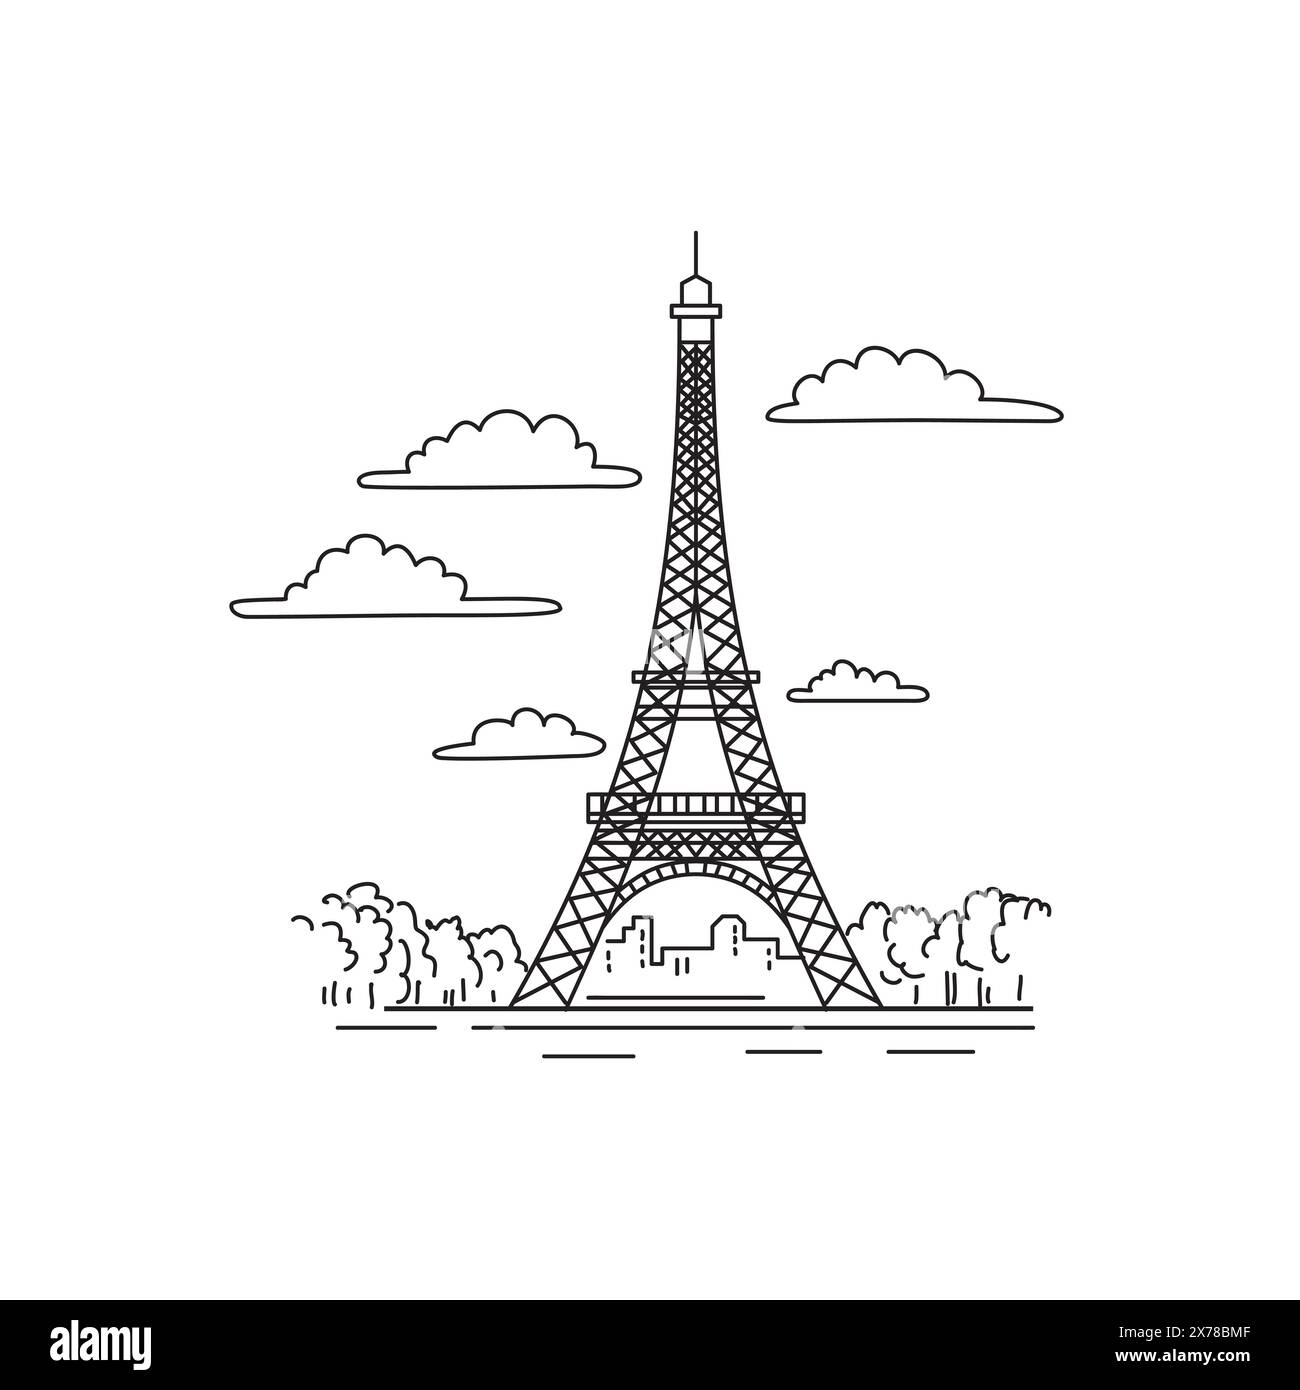 Mono line illustration of Eiffel Tower or Tour Eiffel on the Champ de Mars in Paris, France done in monoline line art black and white style. Stock Vector